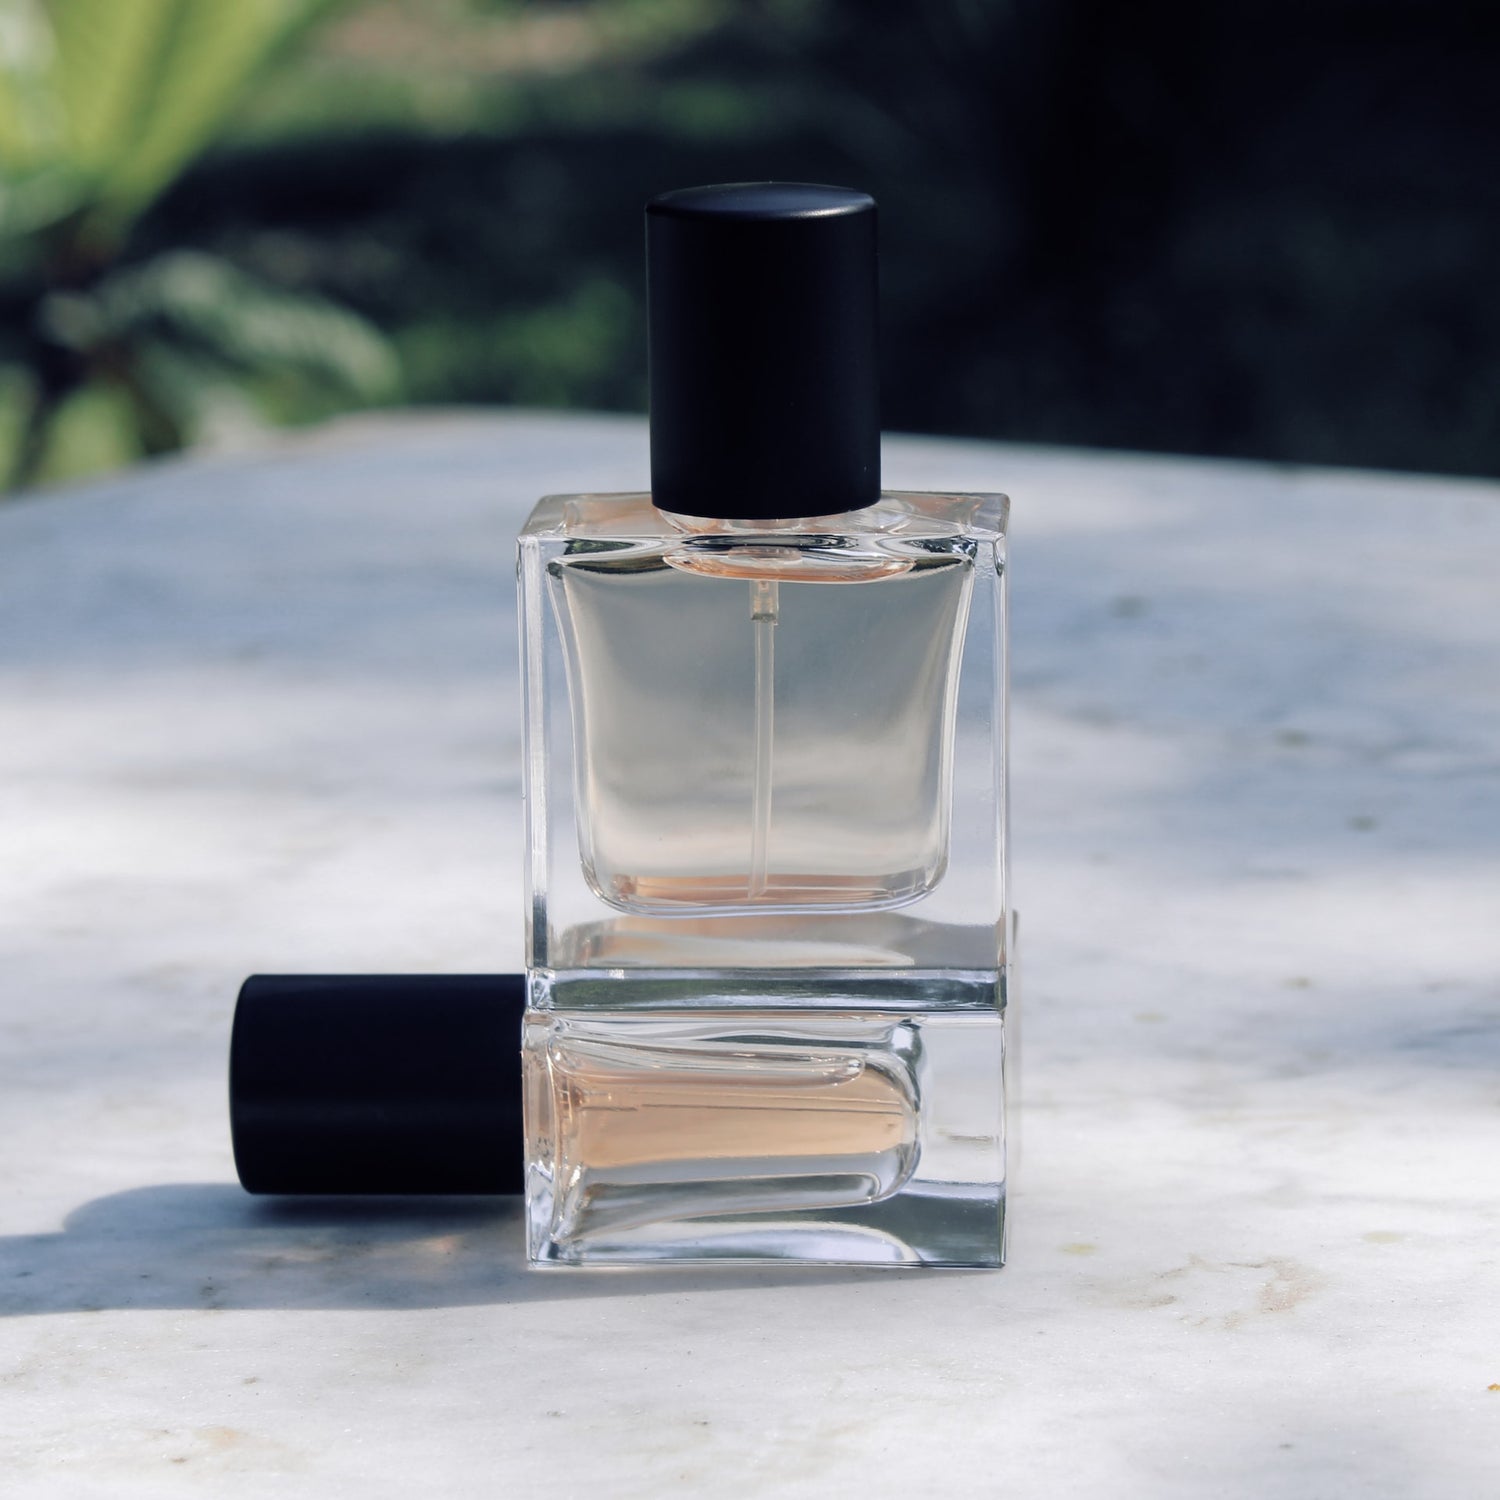 Fragrance Allergy: Does Perfume Cause Allergies?